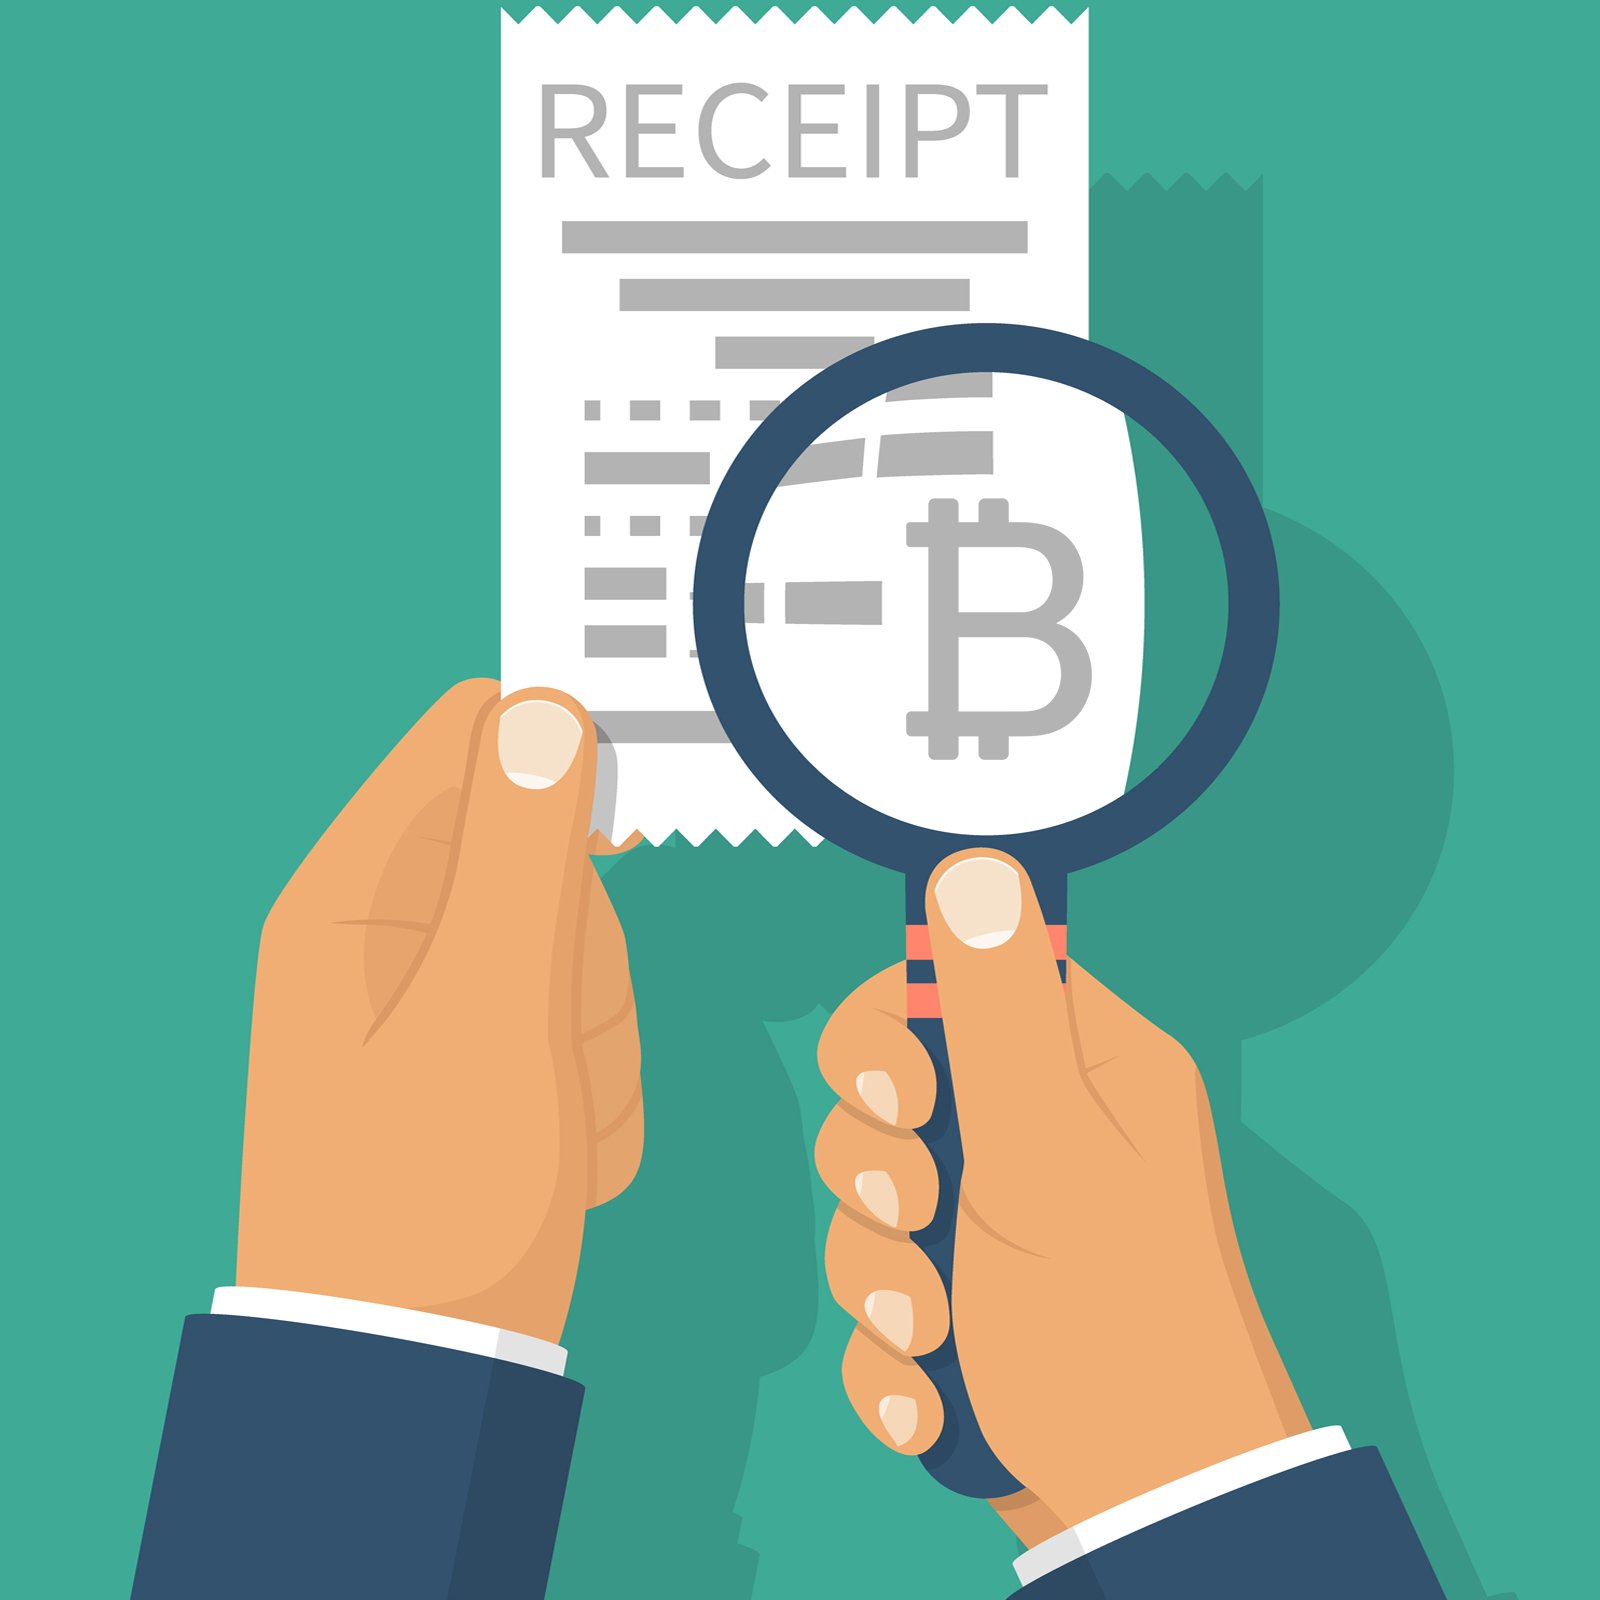 Sales Tax and Bitcoin in the United States Can Be Confusing